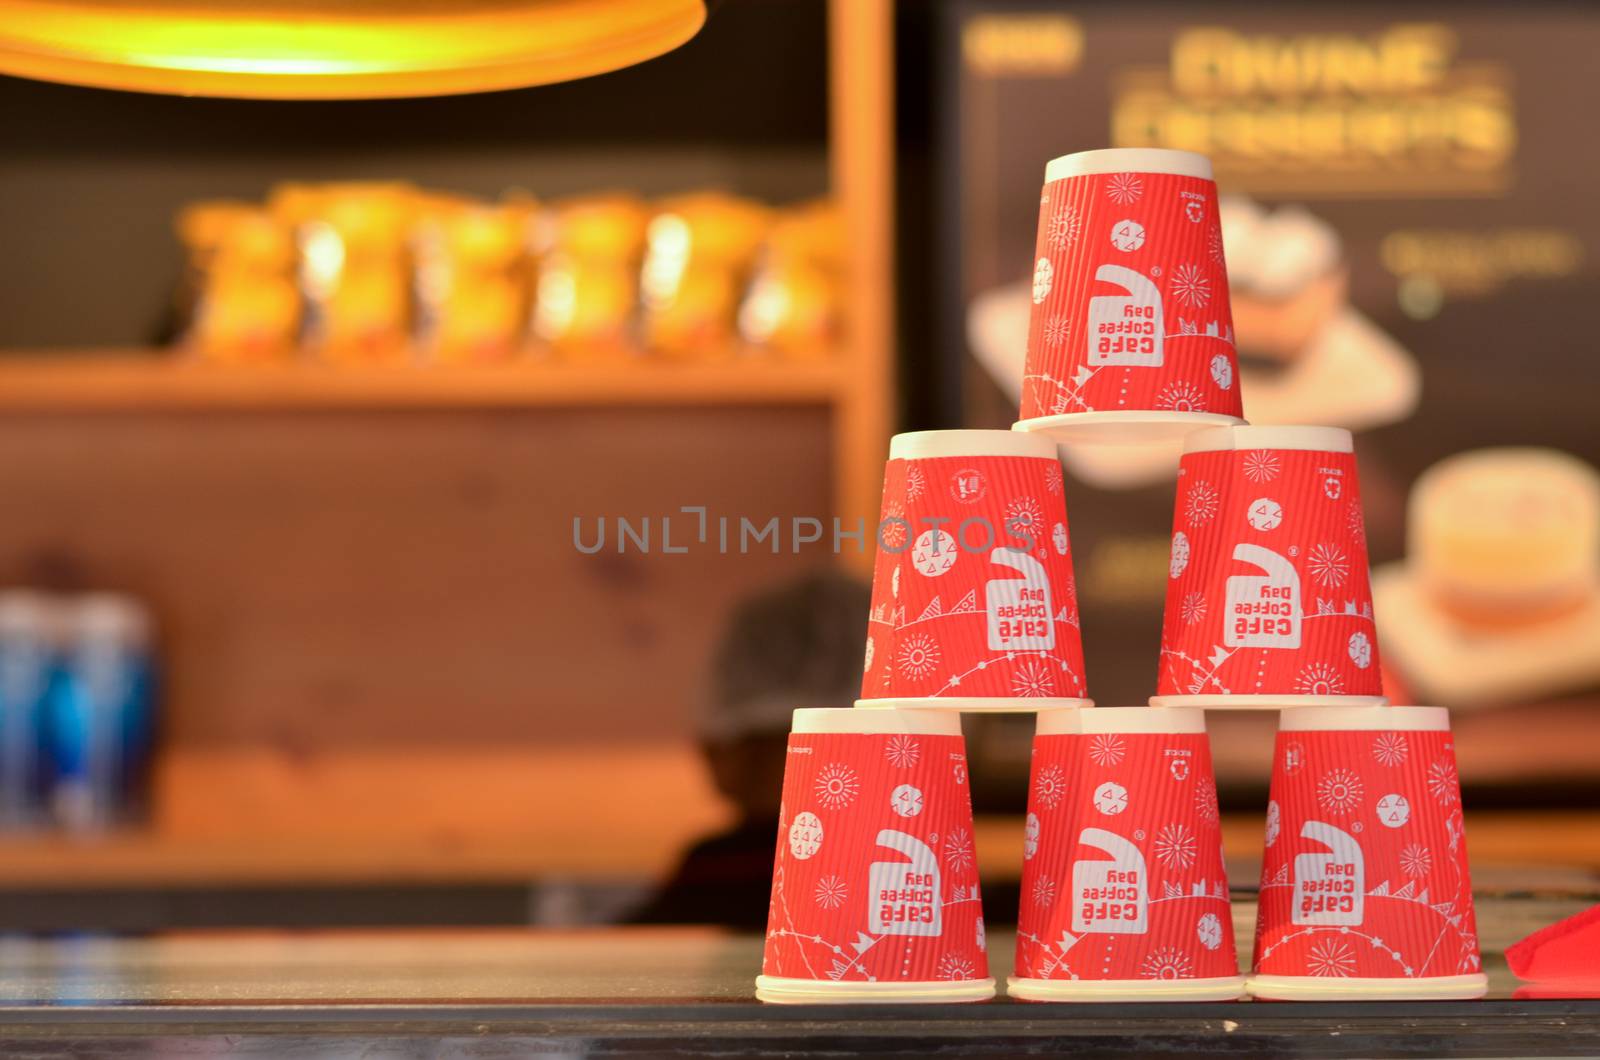 New Delhi, India, 2020. Red disposable cups with the CCD (Cafe Coffee Day) logo stacked on top of each other making pyramids on the counter for display and decor at the coffee shop.